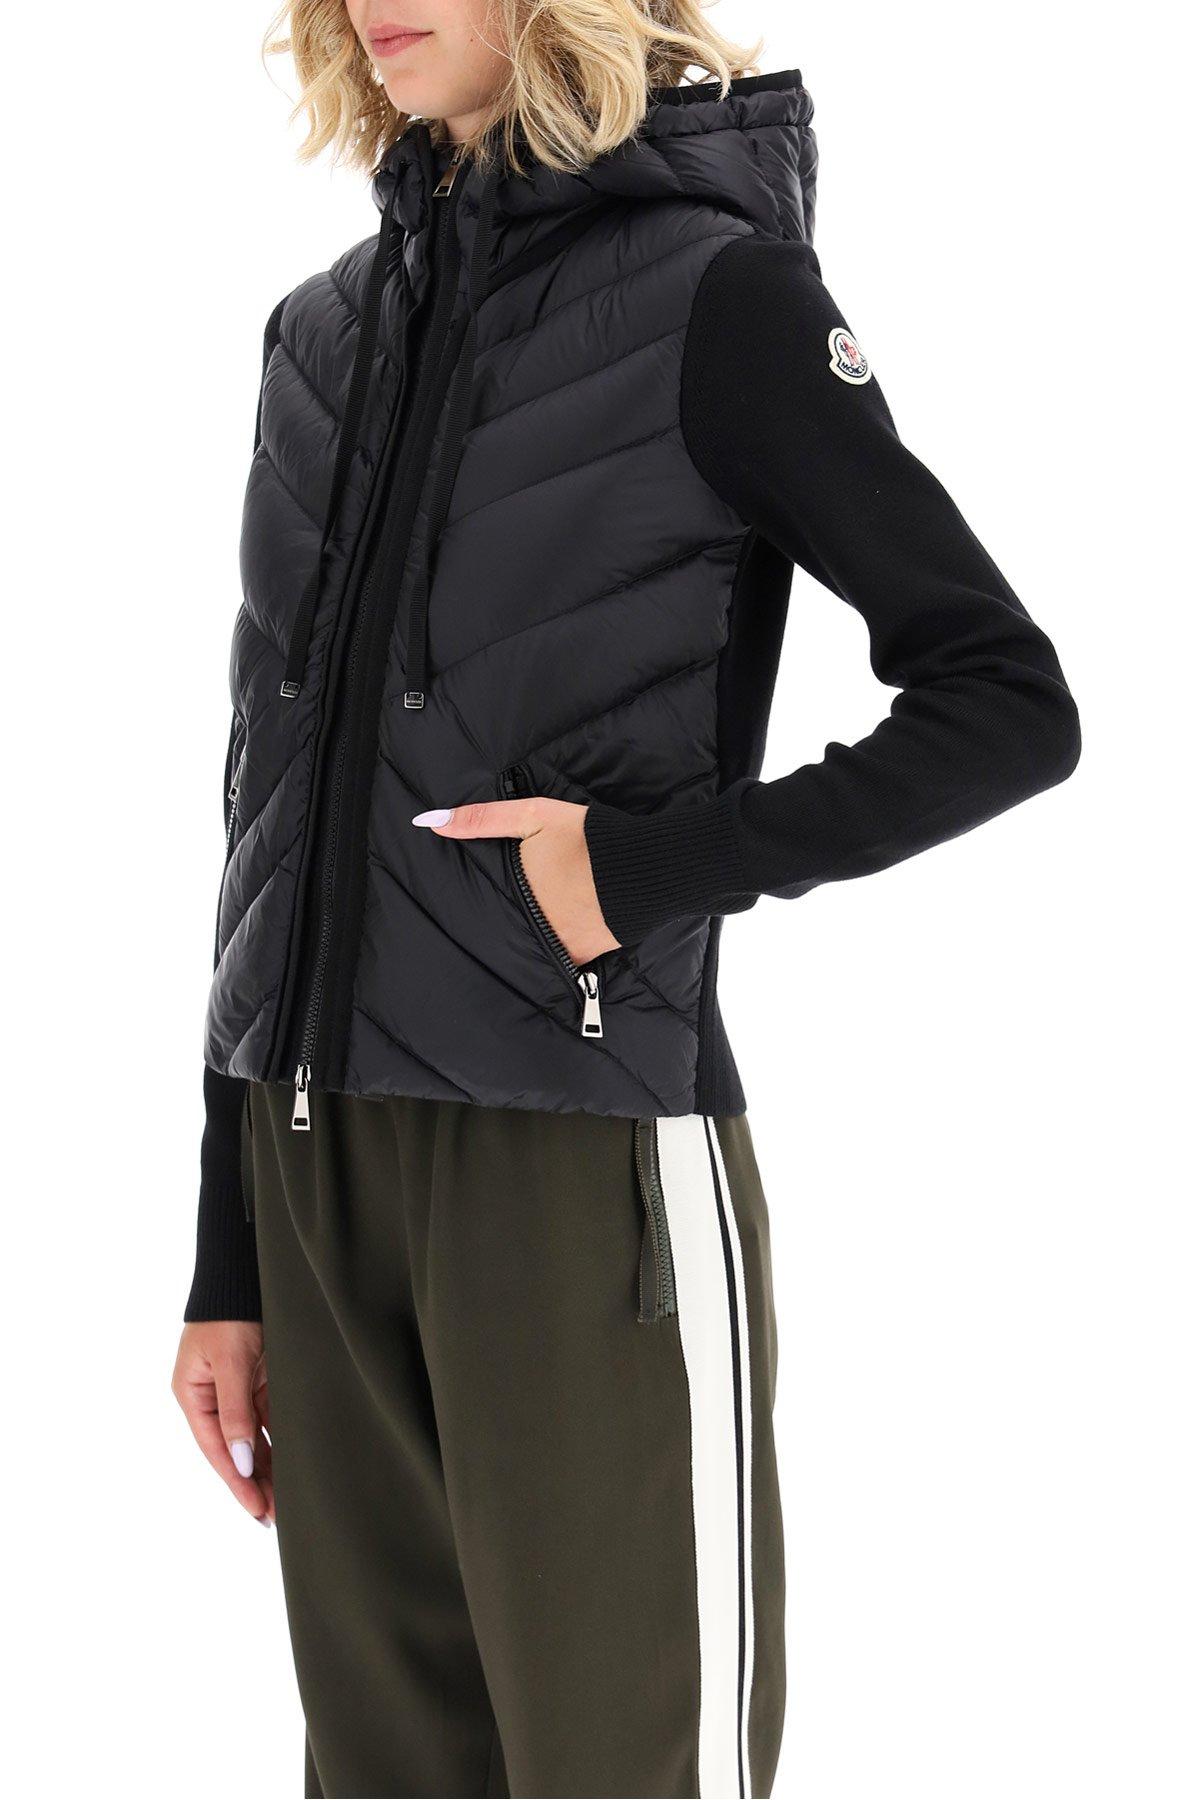 Moncler Wool Basic Knit Cardigan With Padded Panel in xl (Black) - Lyst